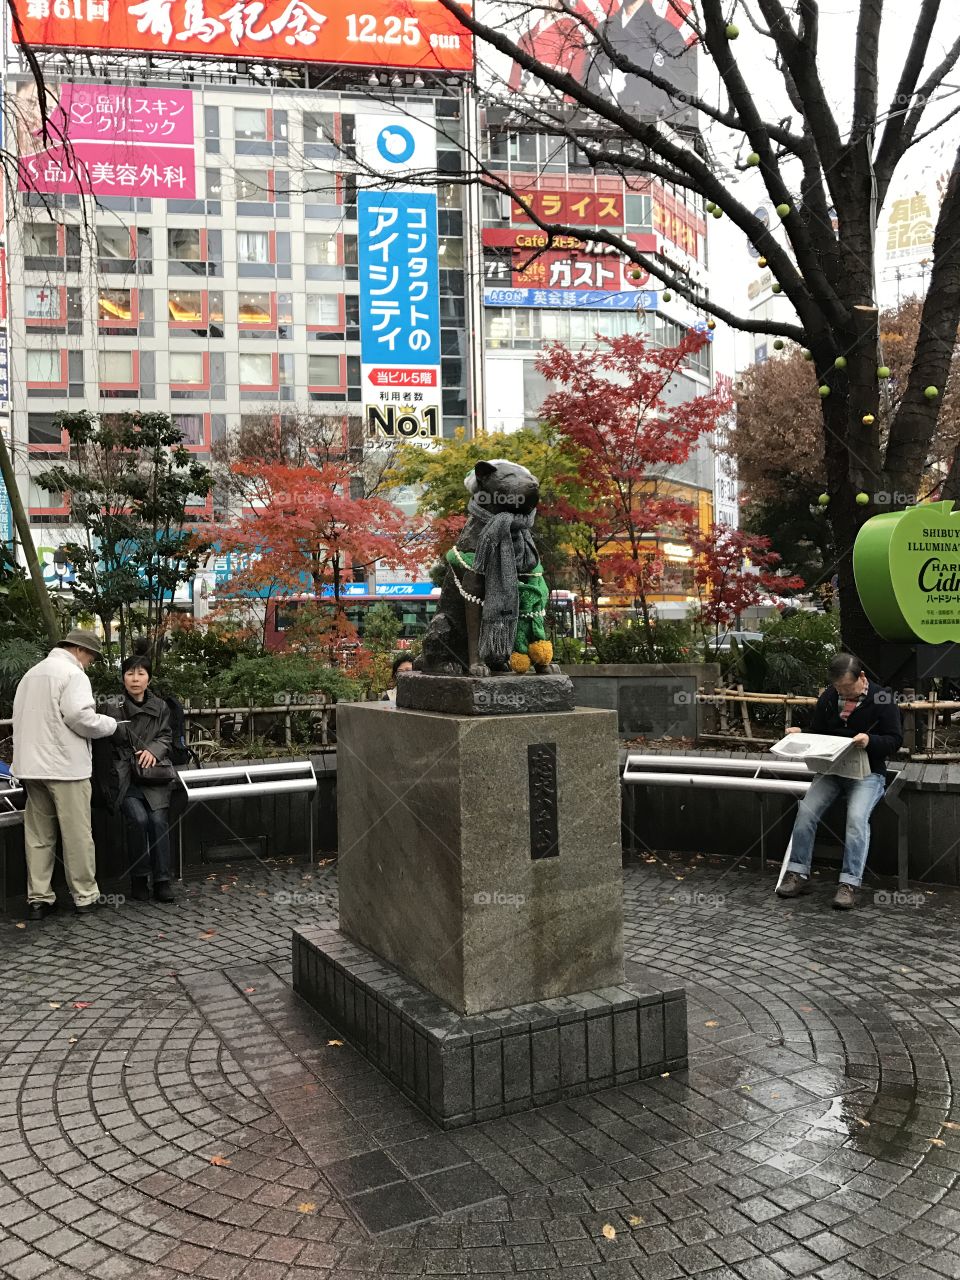 Japan street view, statue of a dog